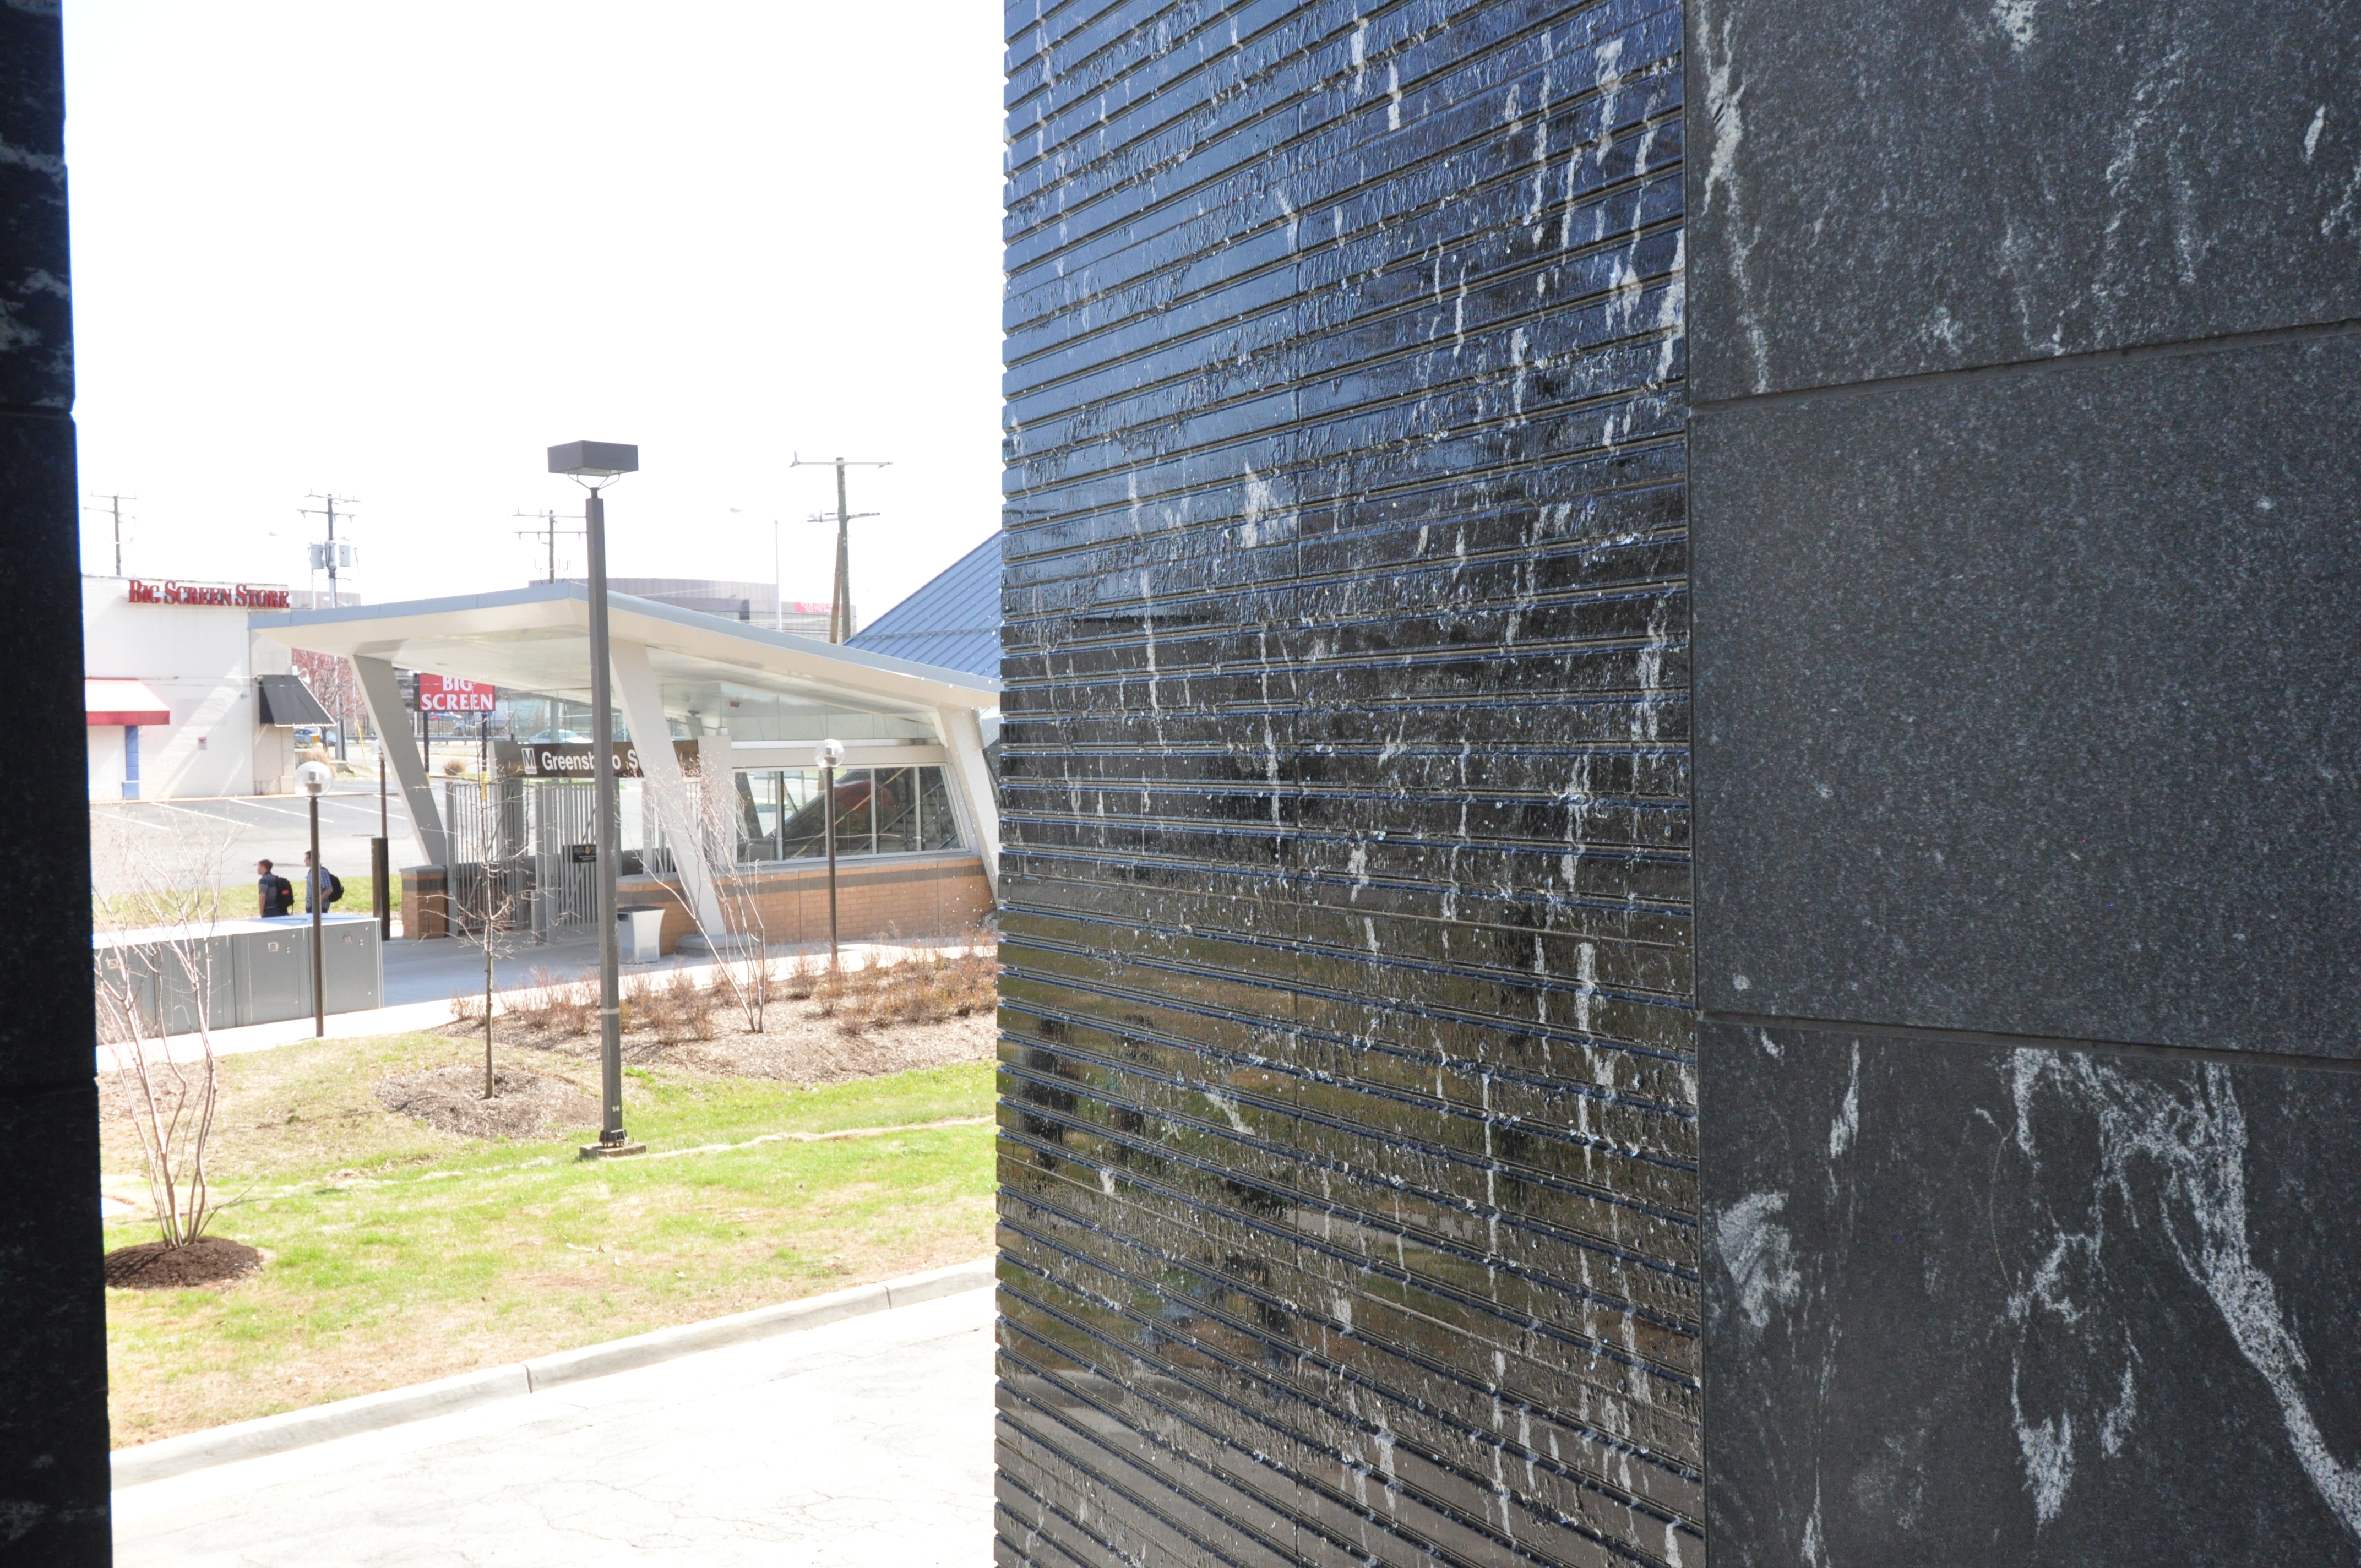 23ft Tall Cut Granite Water Wall, Greensboro Station, McLean, VA. Design by Smith Group JJR.